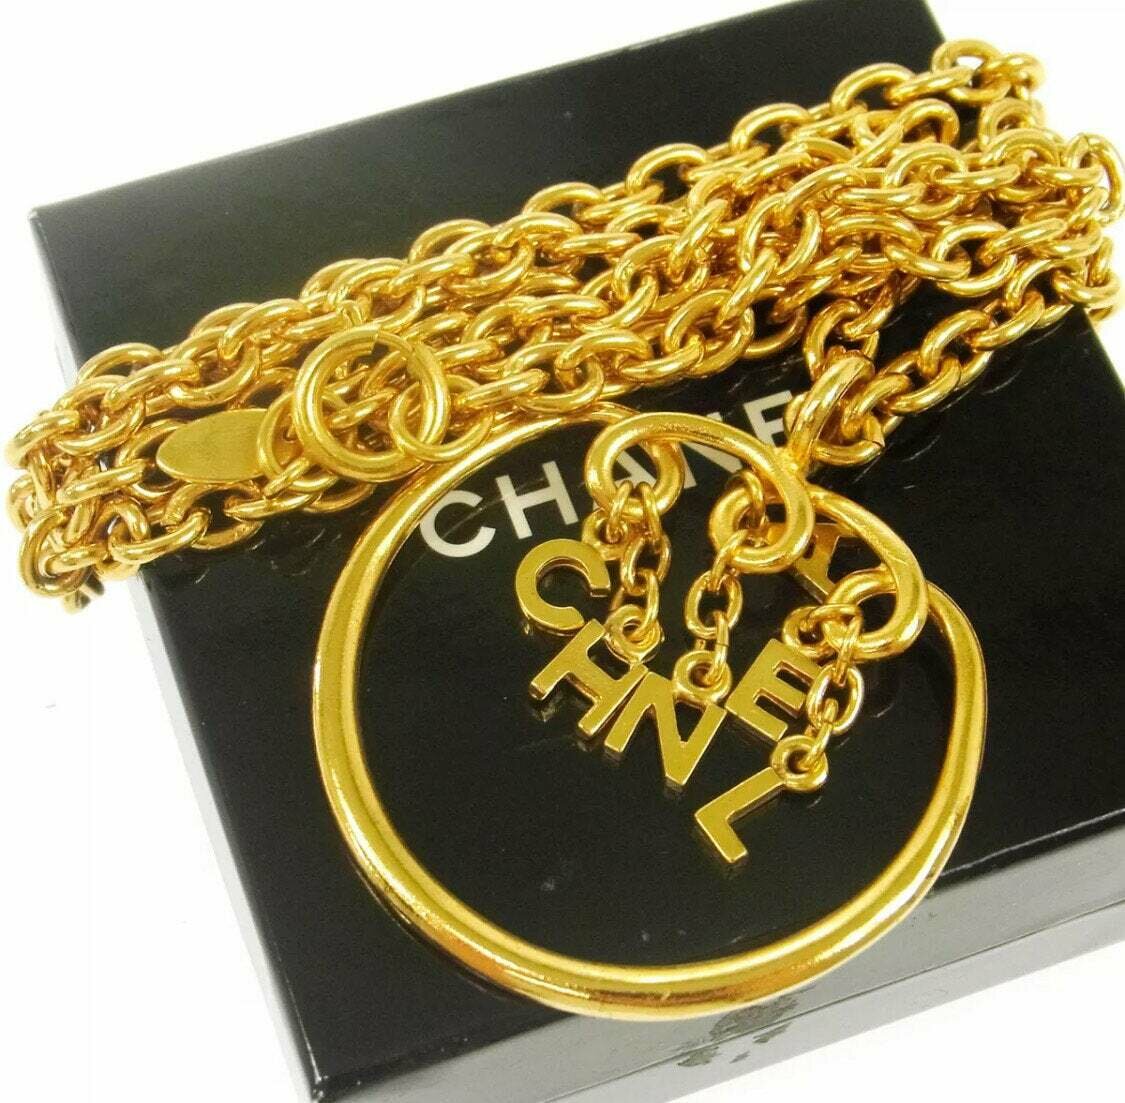 Vintage 90's CHANEL LOGO LETTERS Monogram Gold Plated Charm Necklace Choker  Jewelry